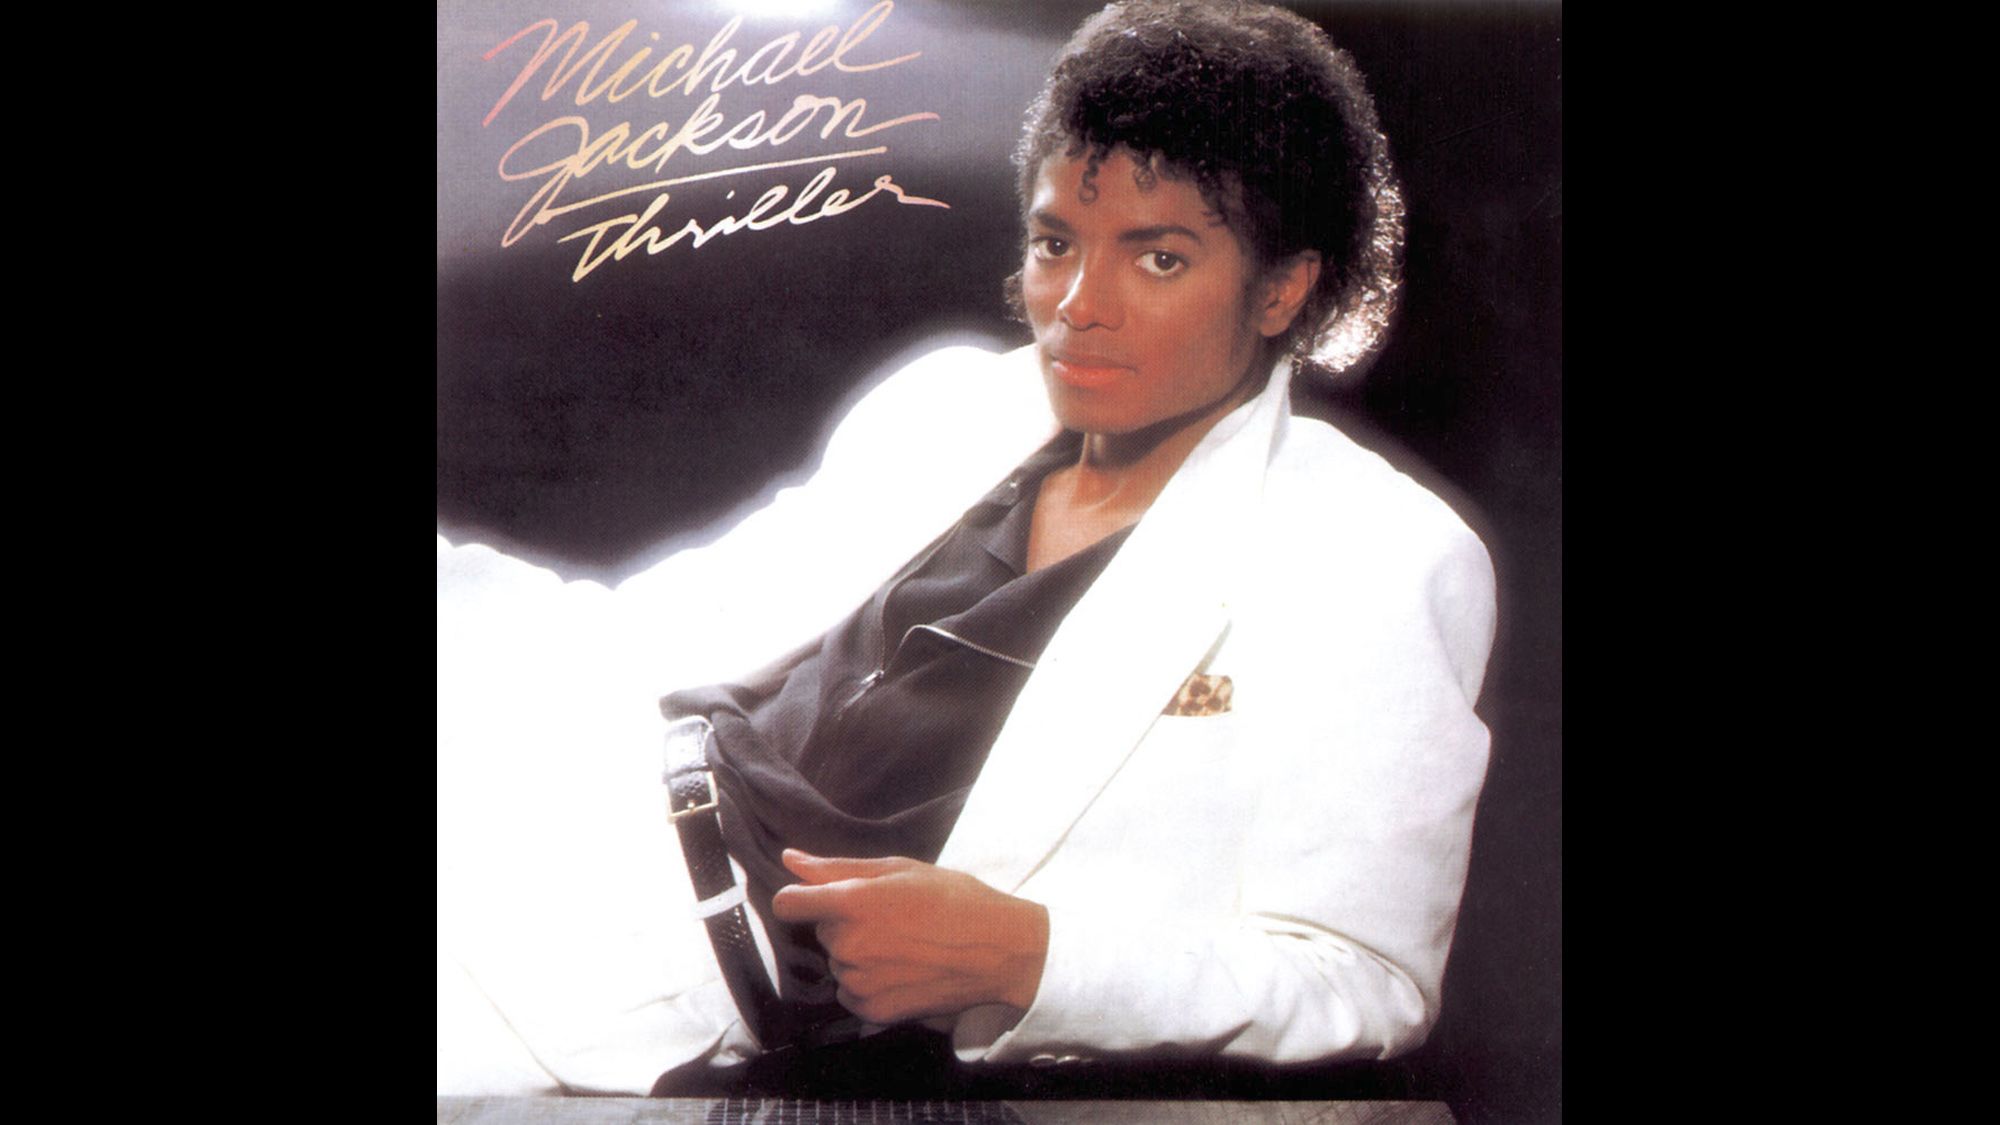 𝕜𝕩 on X: TOP 20 best-selling albums of all time (pure sales) 1.  #MichaelJackson - Thriller 2. #ACDC - Back in Black 3. #WhitneyHouston -  The Bodyguard  / X